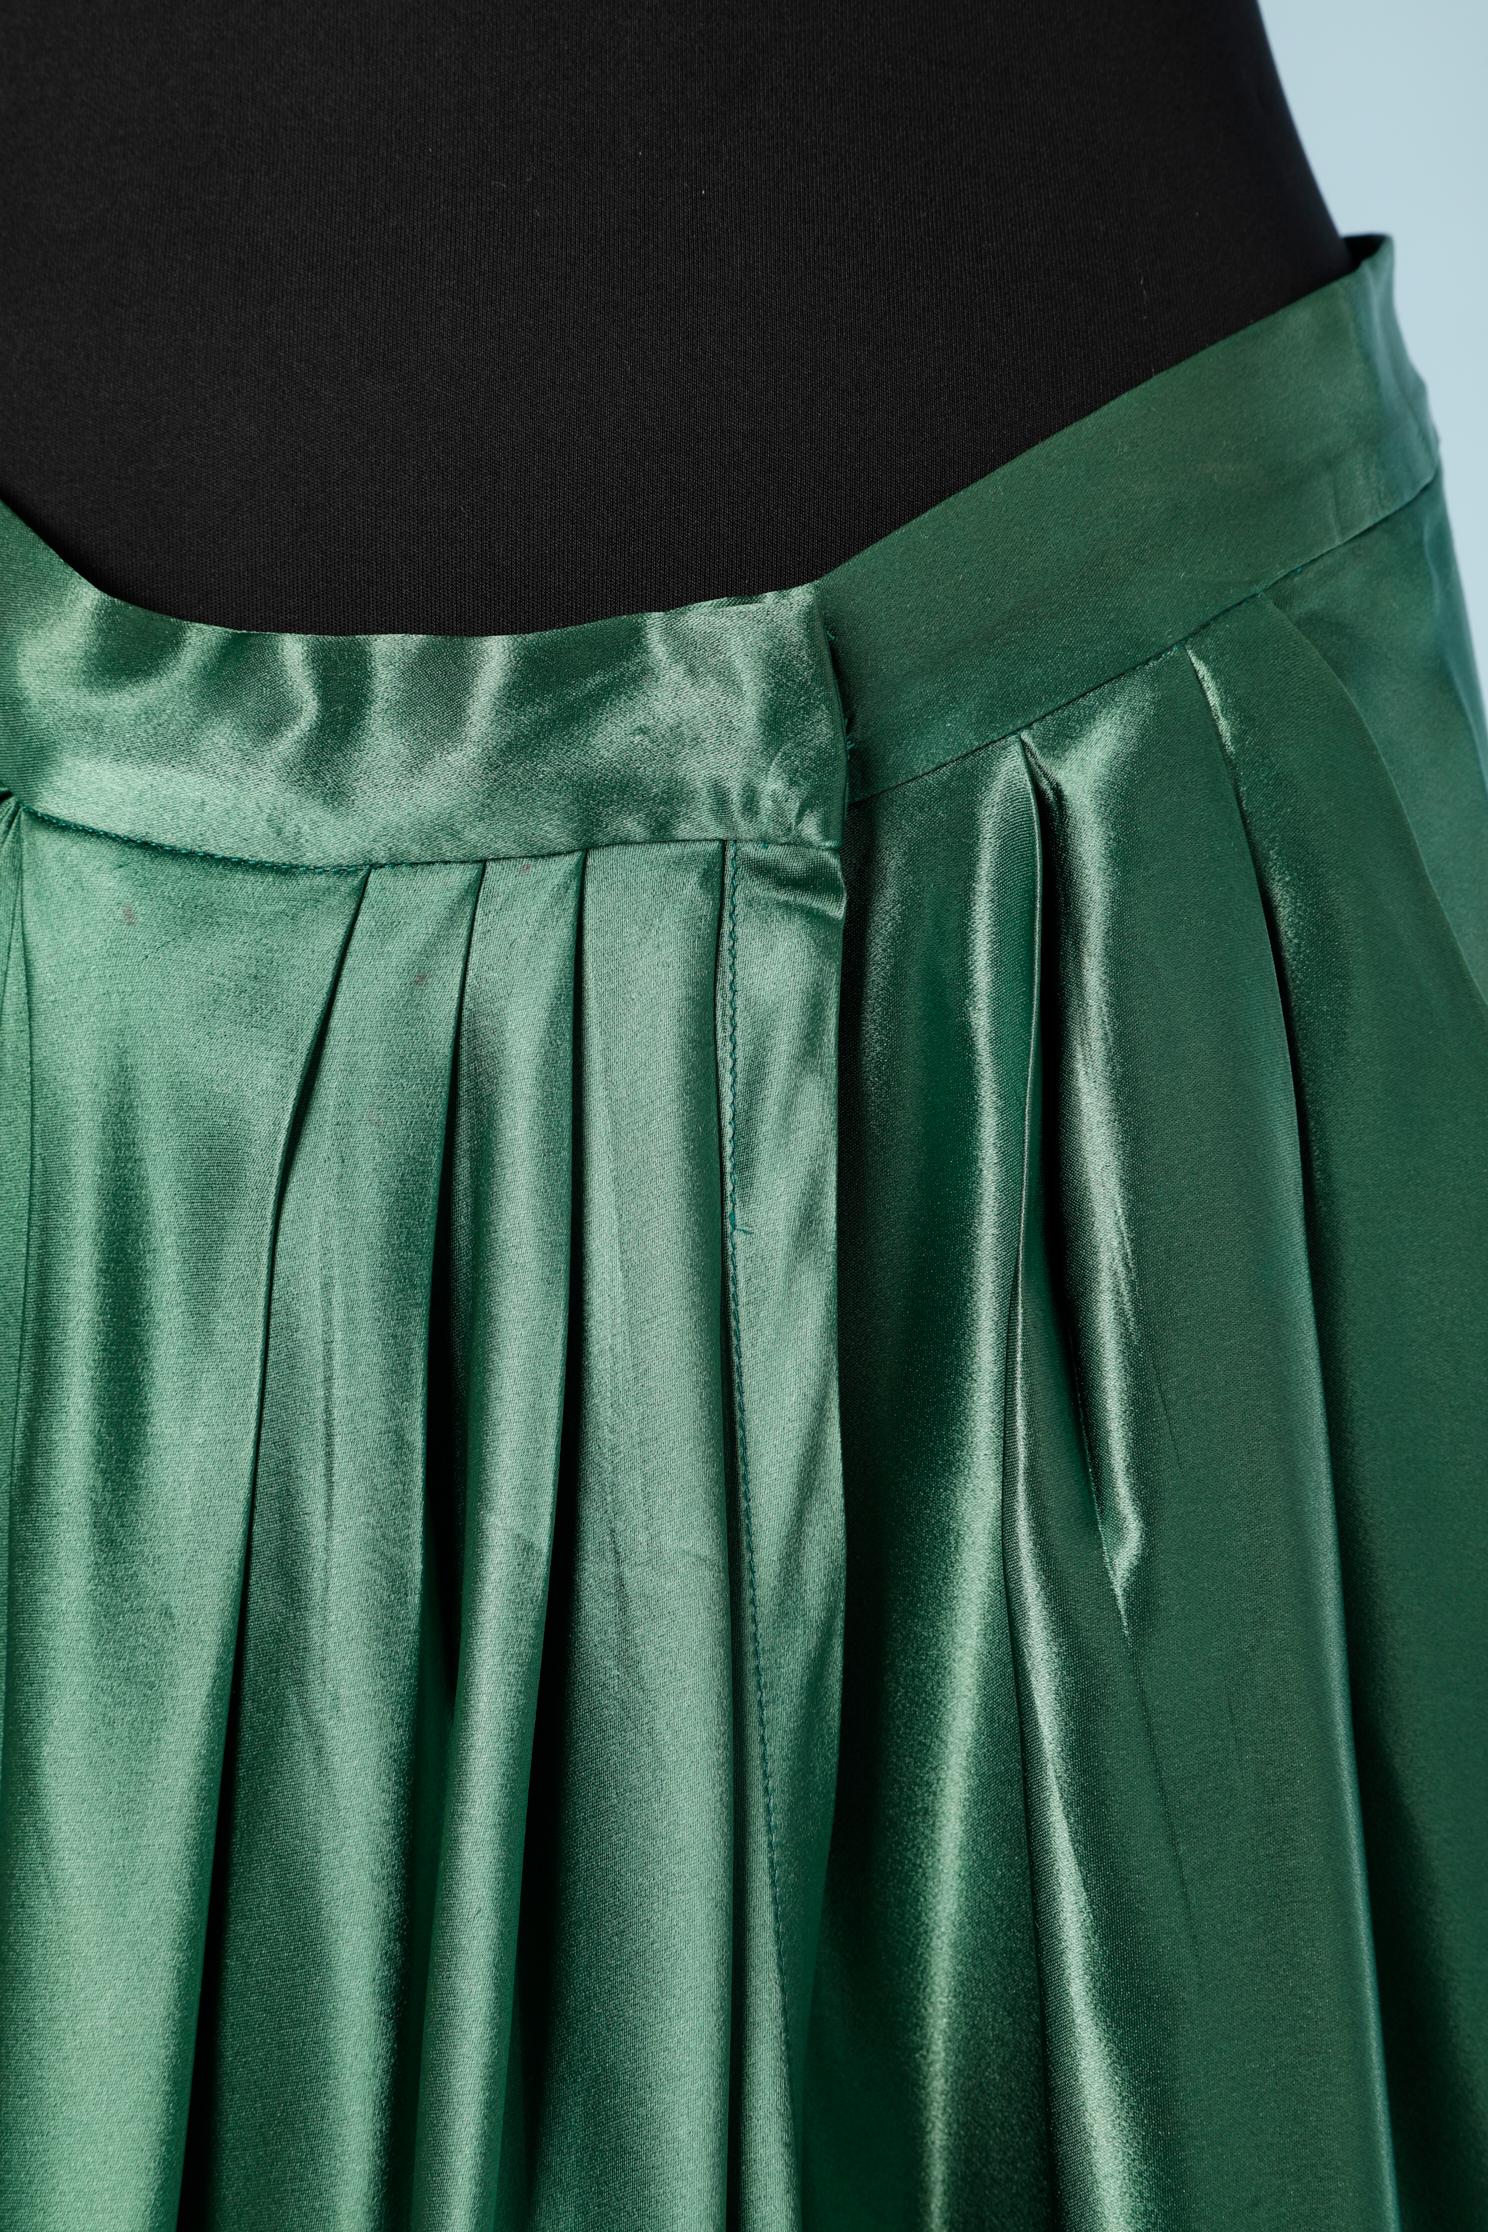 Wrap and draped skirt in emerald silk satin.
No lining. Inside button and buttonhole and hook&eye 
SIZE M